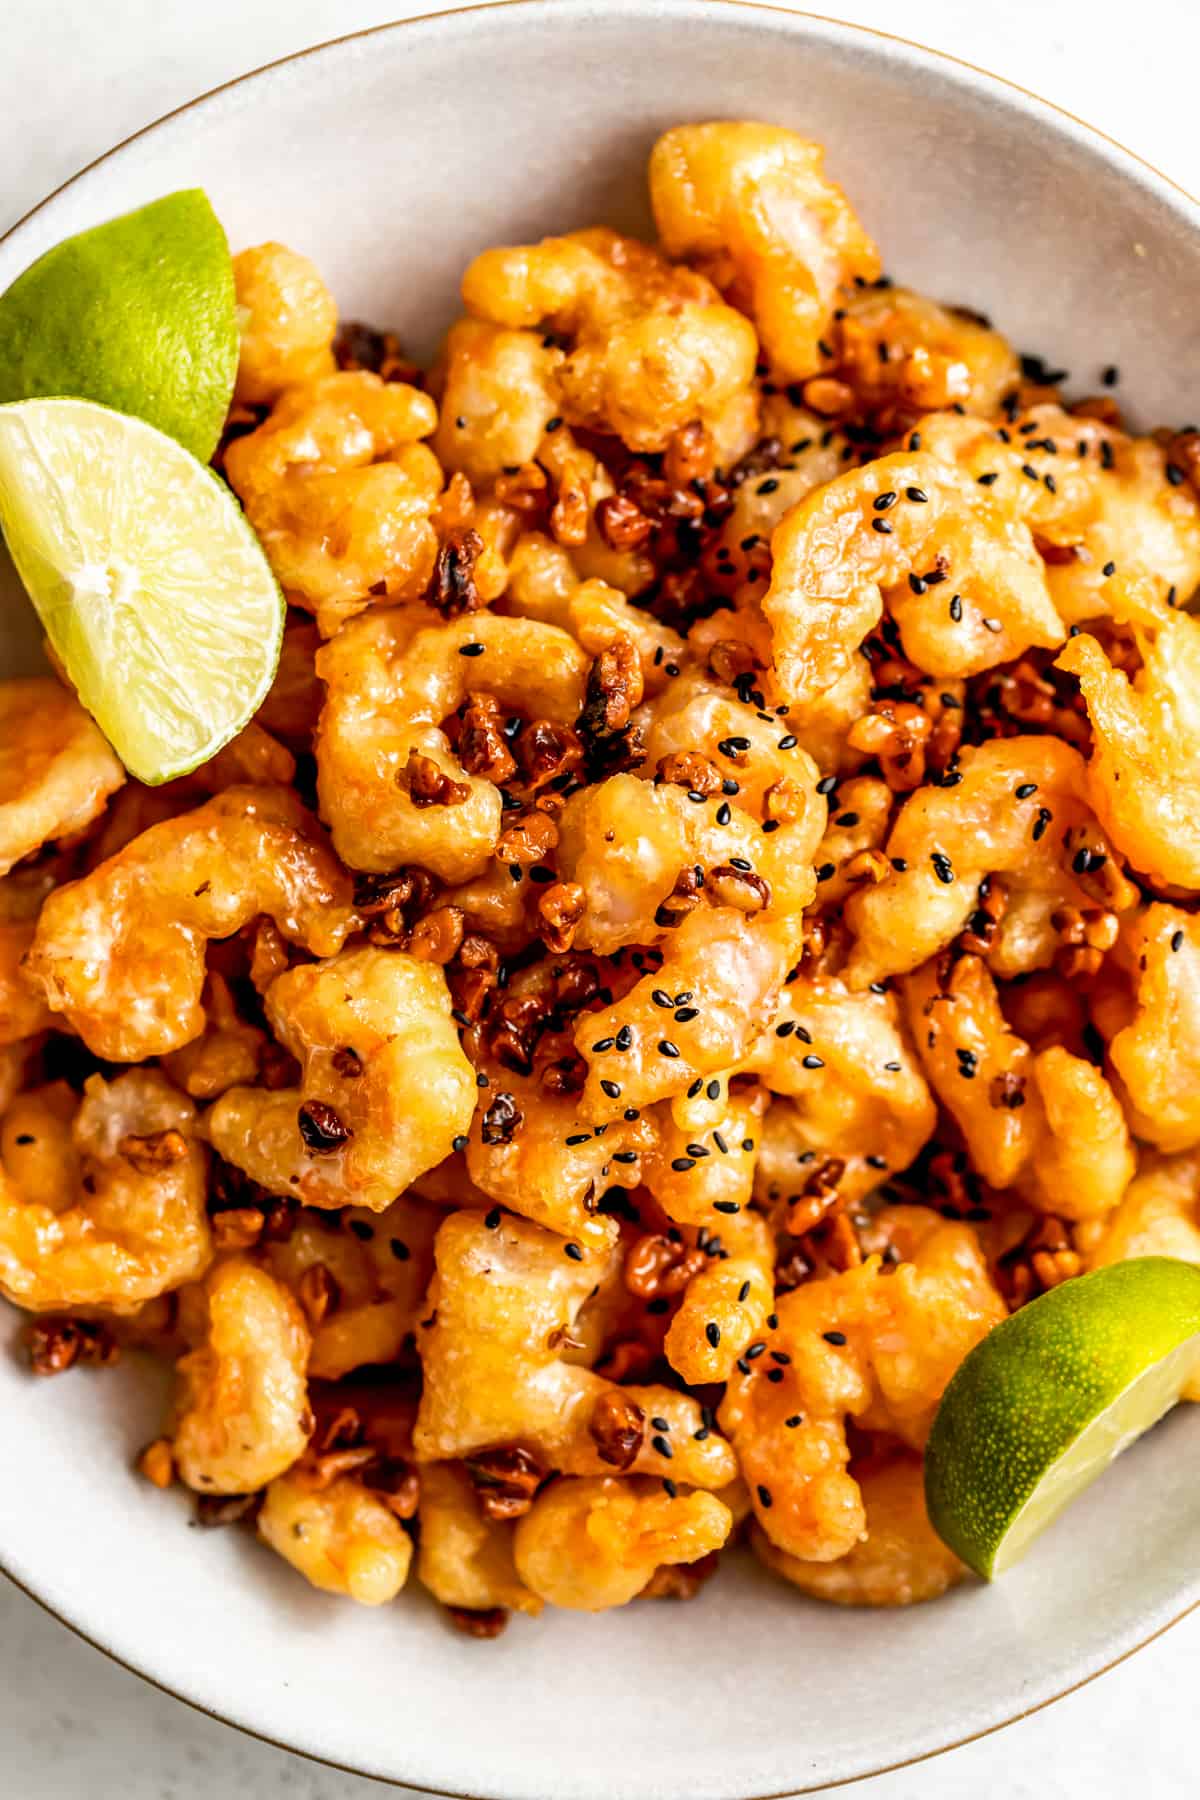 Honey walnut prawns with sesame seeds and a lime wedge.